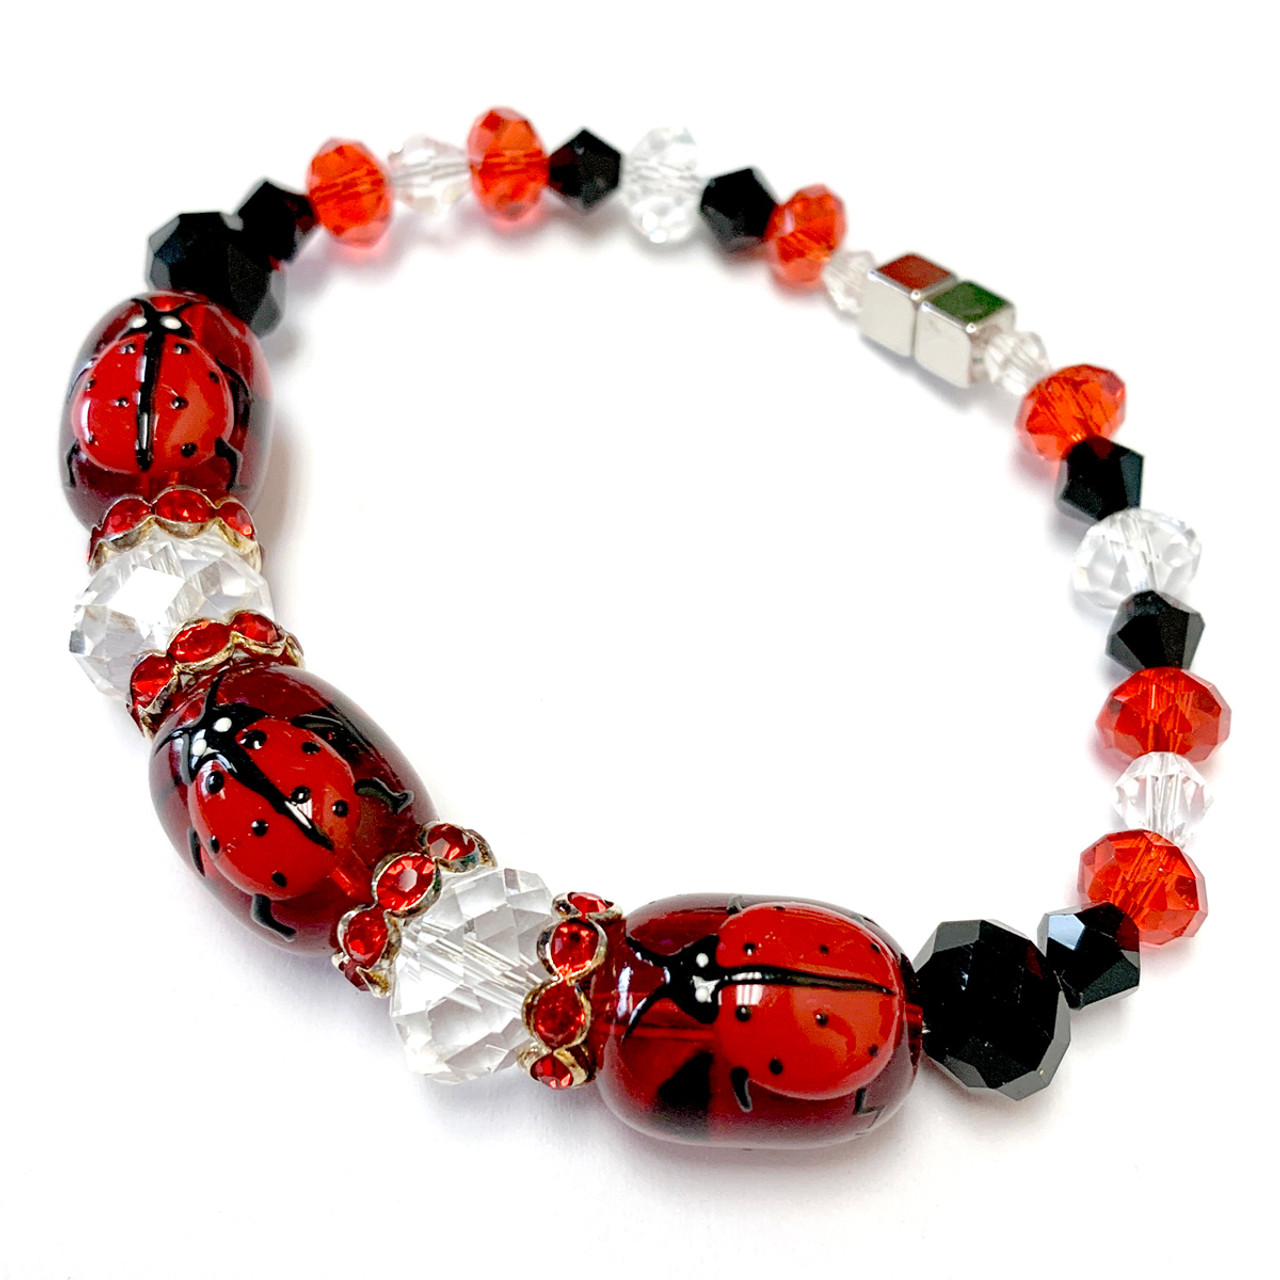 Red Ladybug Bracelet - Spring Jewelry for Daughter - Handmade Glass and  Crystals Beaded Bracelet for Girlfriend - Fiona - IUP013LM